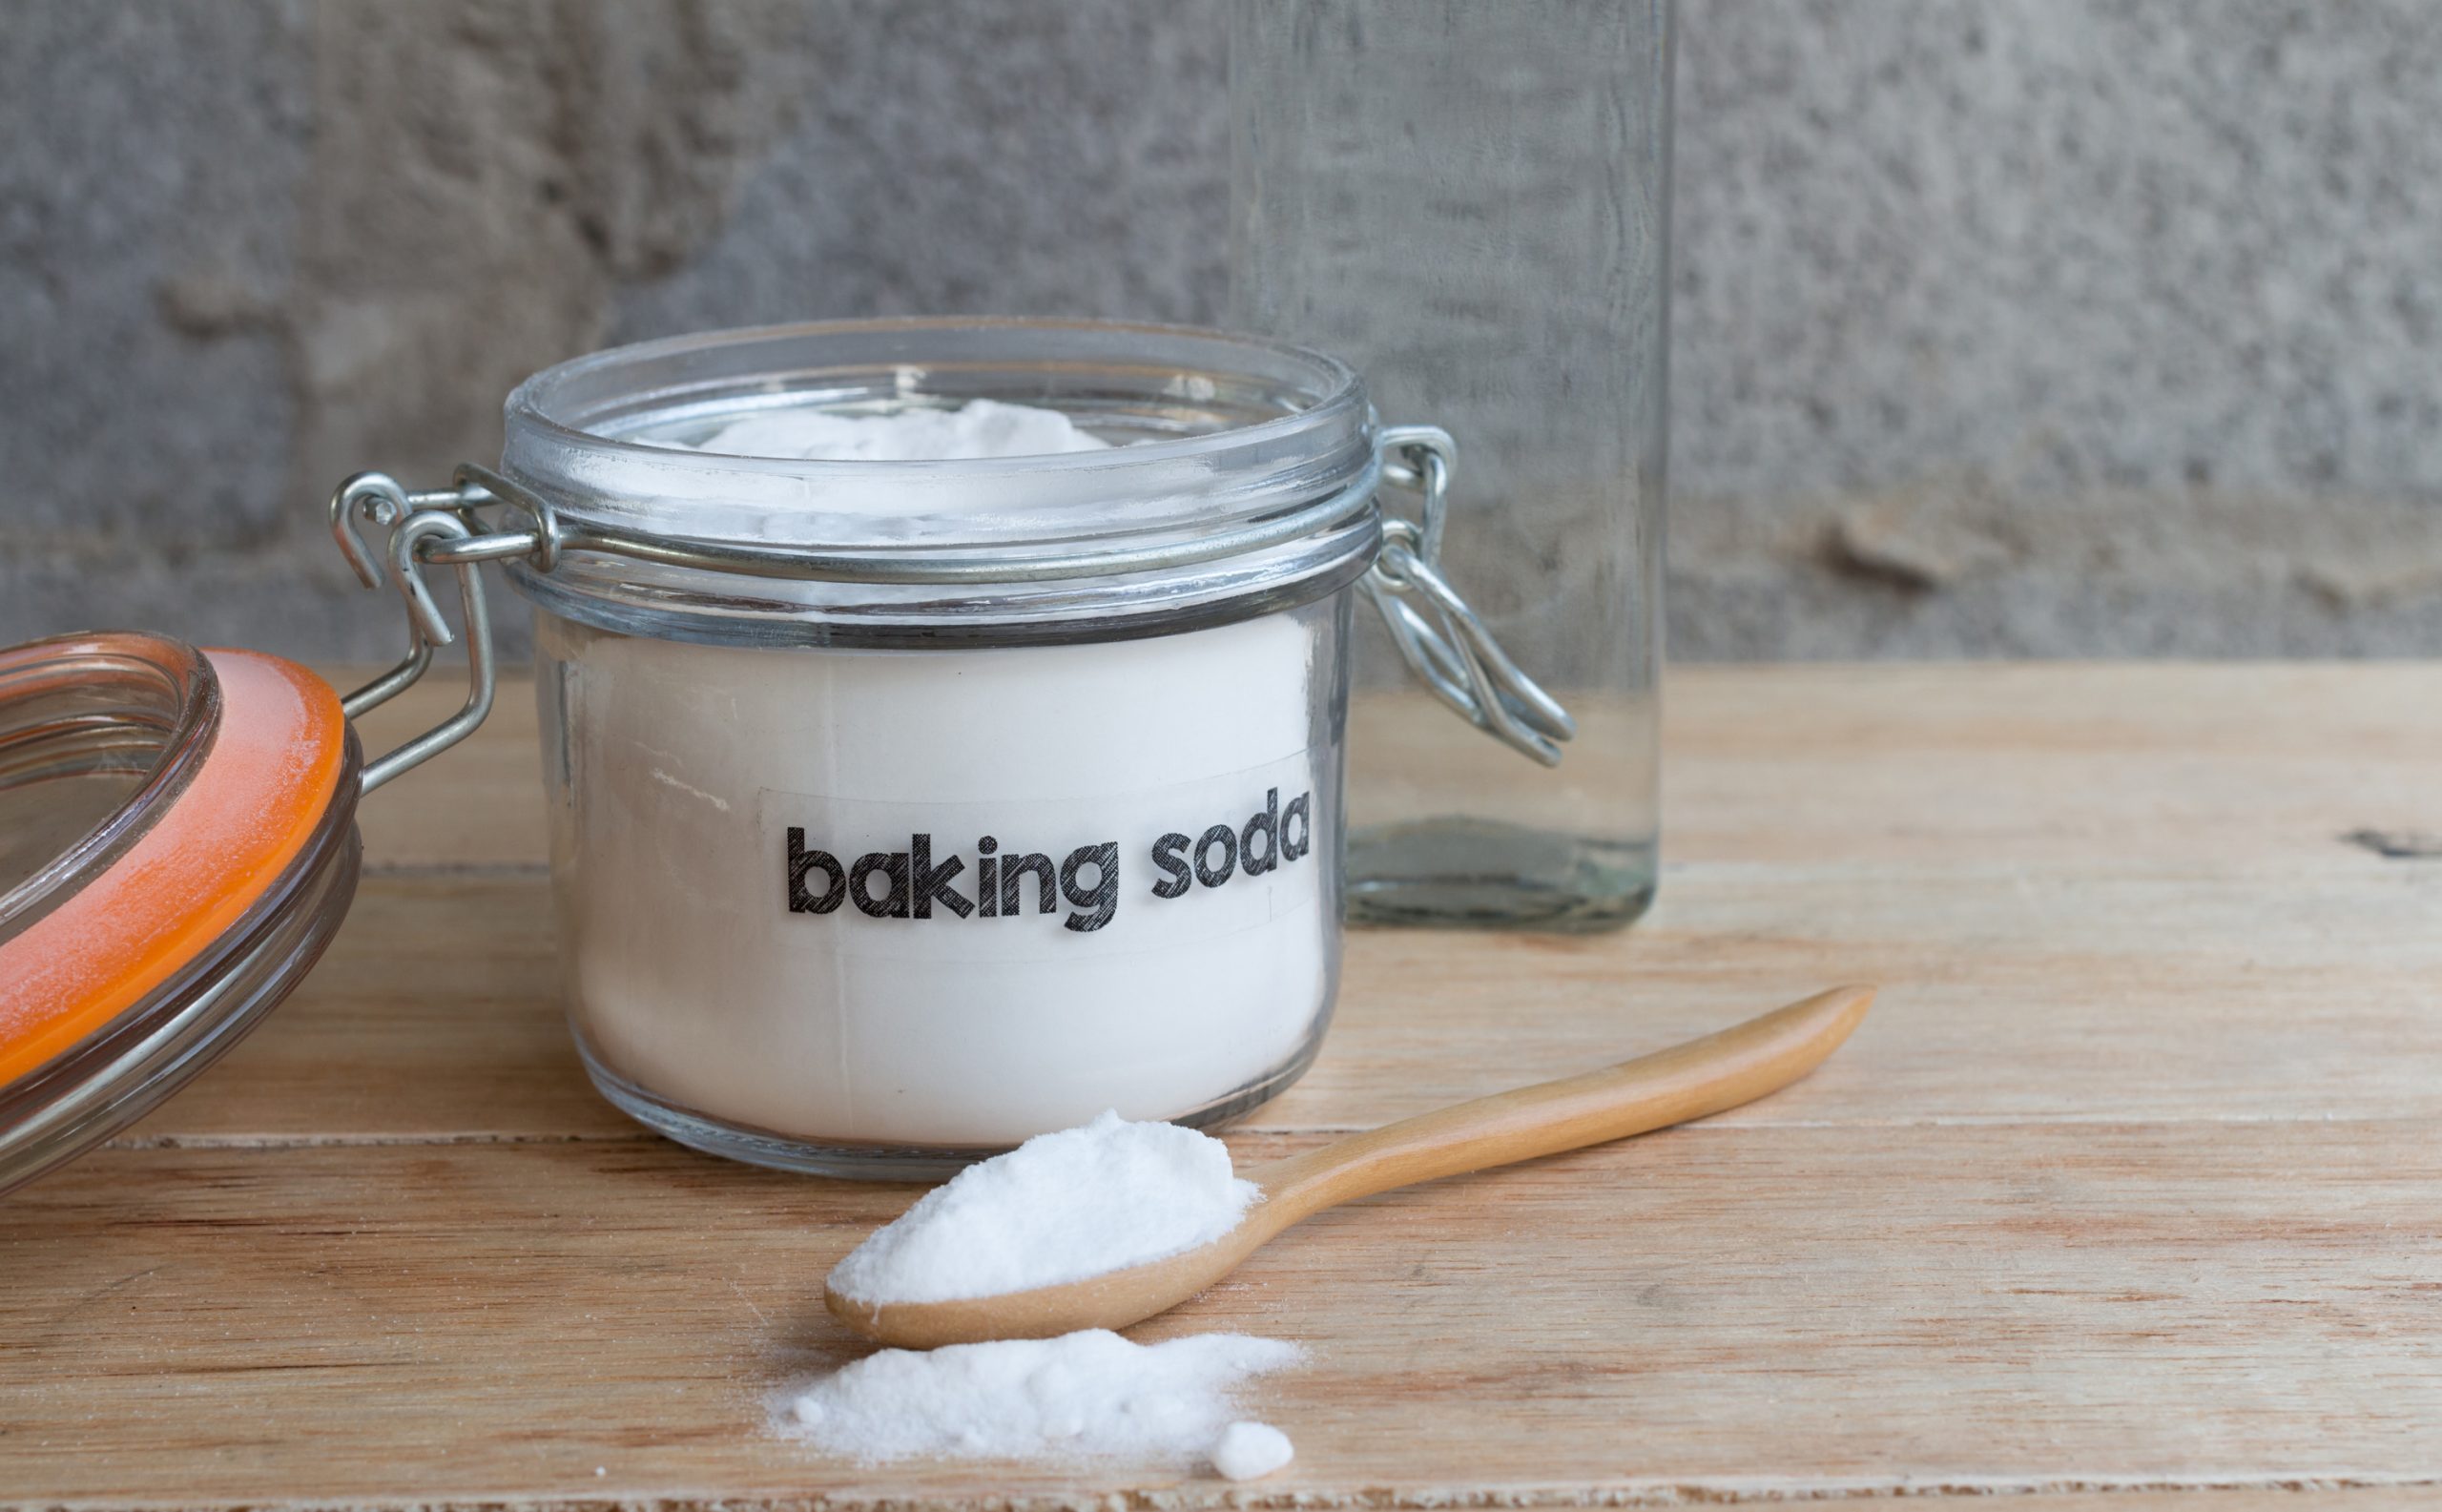 Baking soda in a jar next to a wooden spoon.